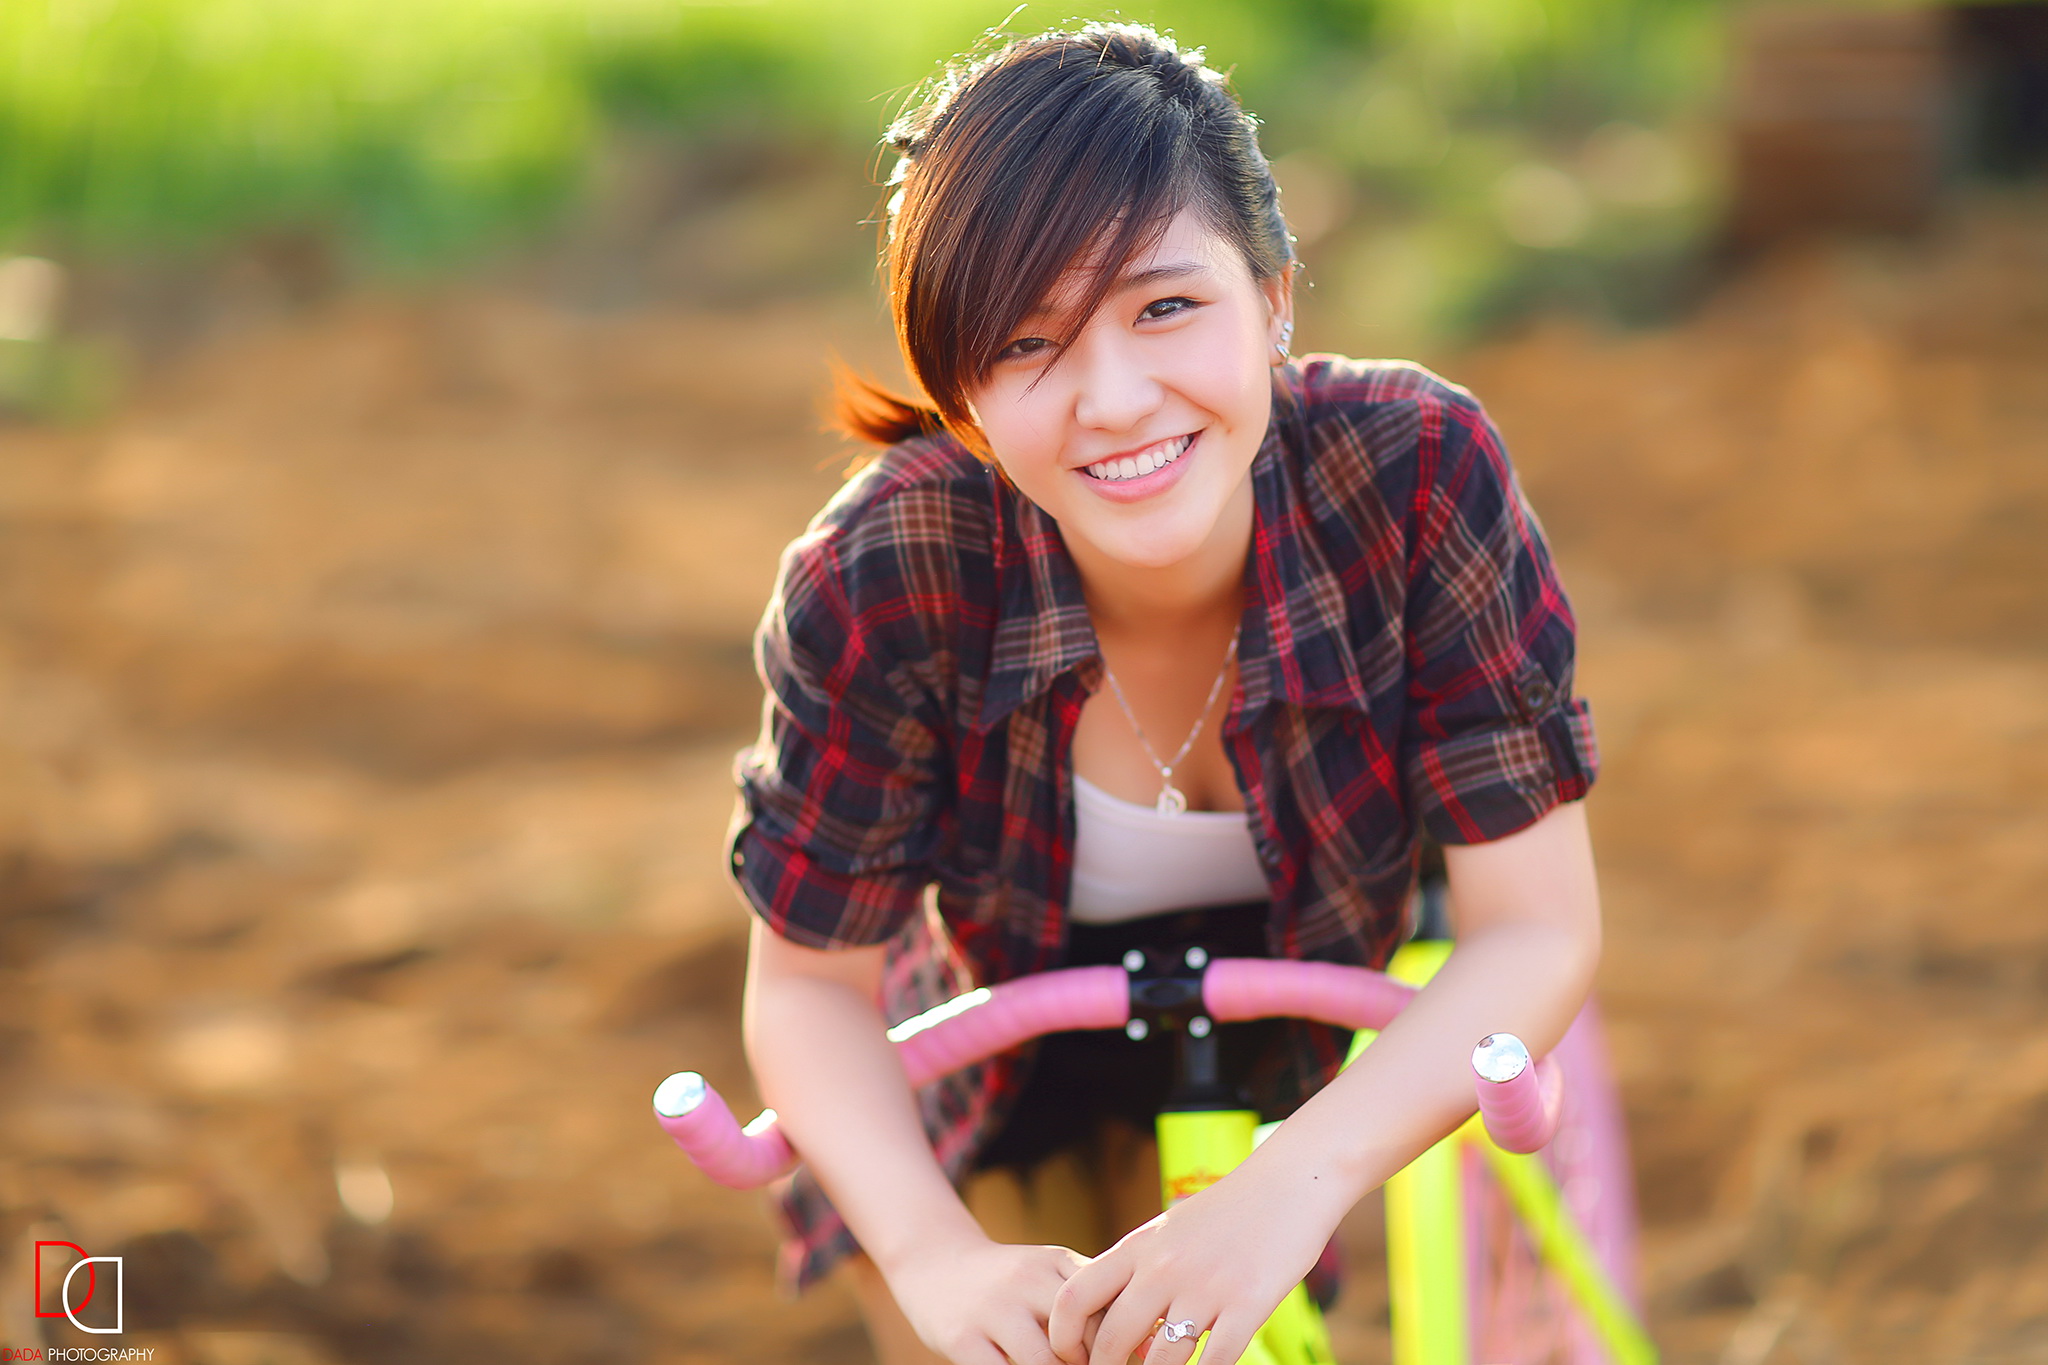 Women Model Brunette Looking At Viewer Bicycle Smiling Plaid Shirt Asian Women With Bicycles 2048x1365